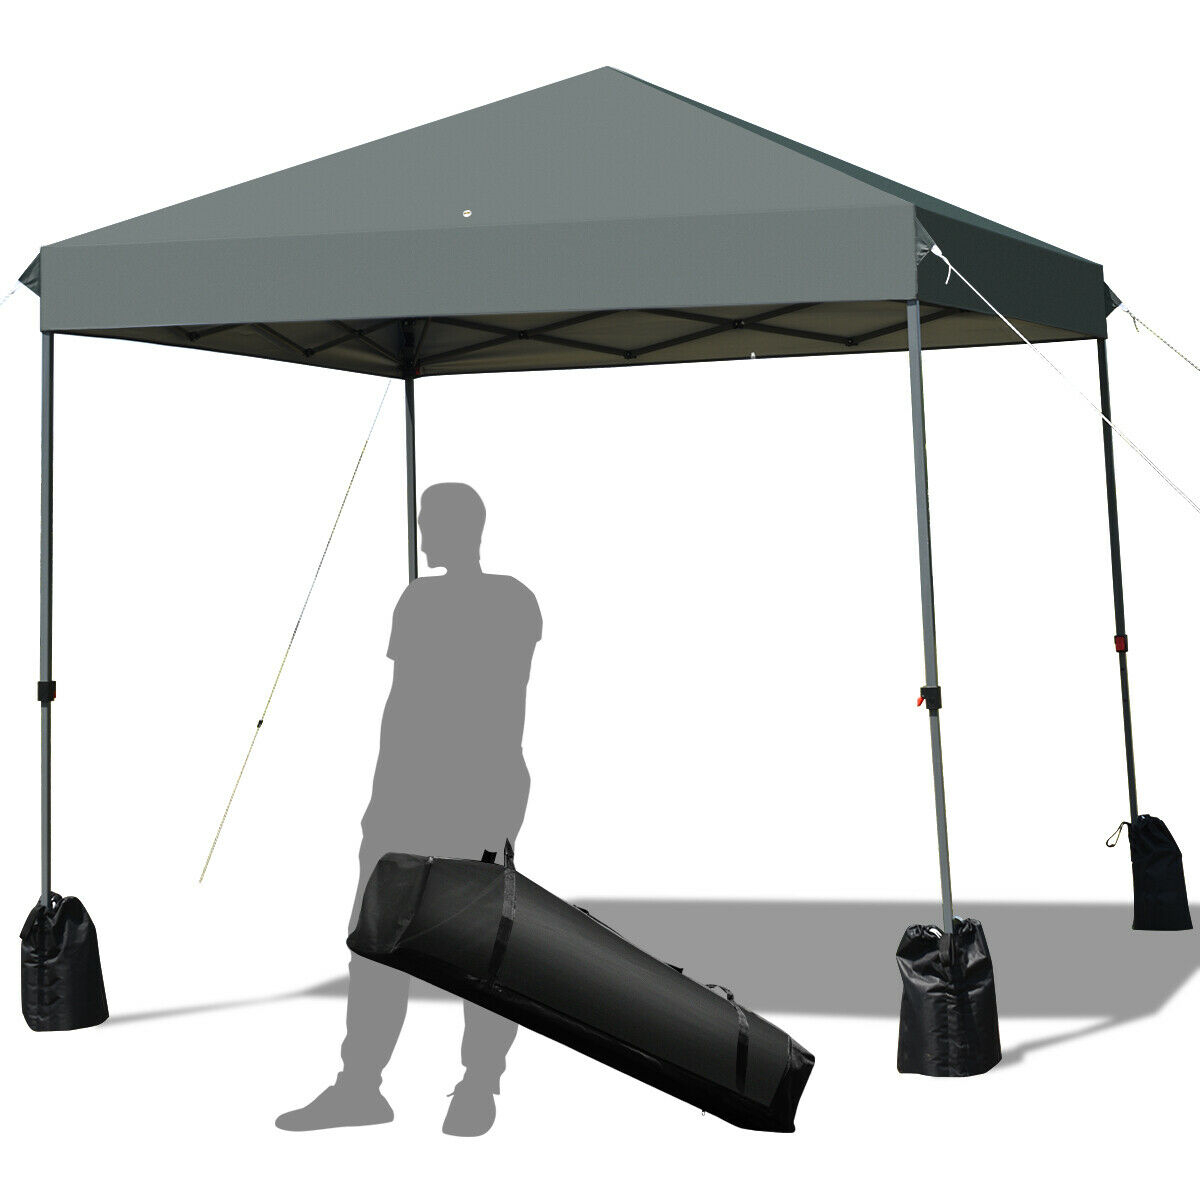 8x8 FT Pop Up Canopy Tent Shelter Wheeled Carry Bag 4 Canopy Sand Bag - Gray